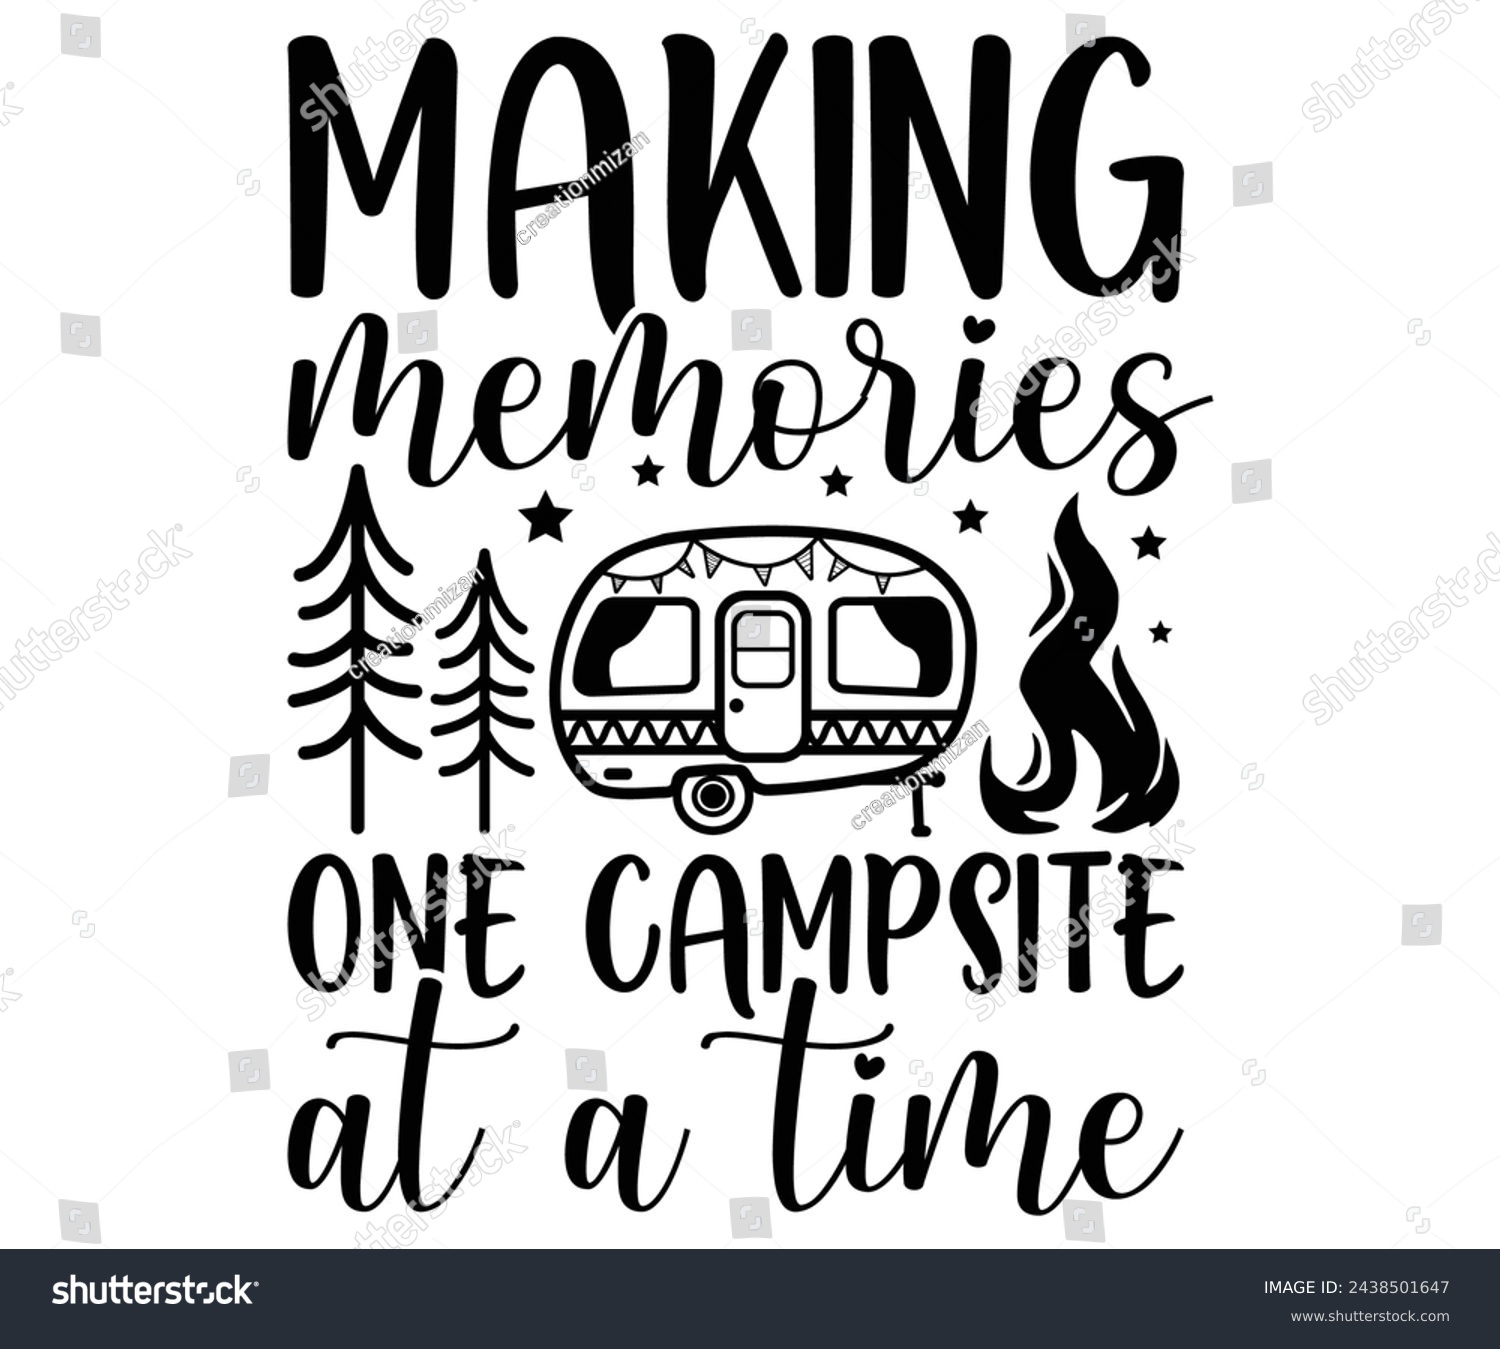 SVG of Making Memories One Campsite At A Time Svg,Camping Svg,Hiking,Funny Camping,Adventure,Summer Camp,Happy Camper,Camp Life,Camp Saying,Camping Shirt svg